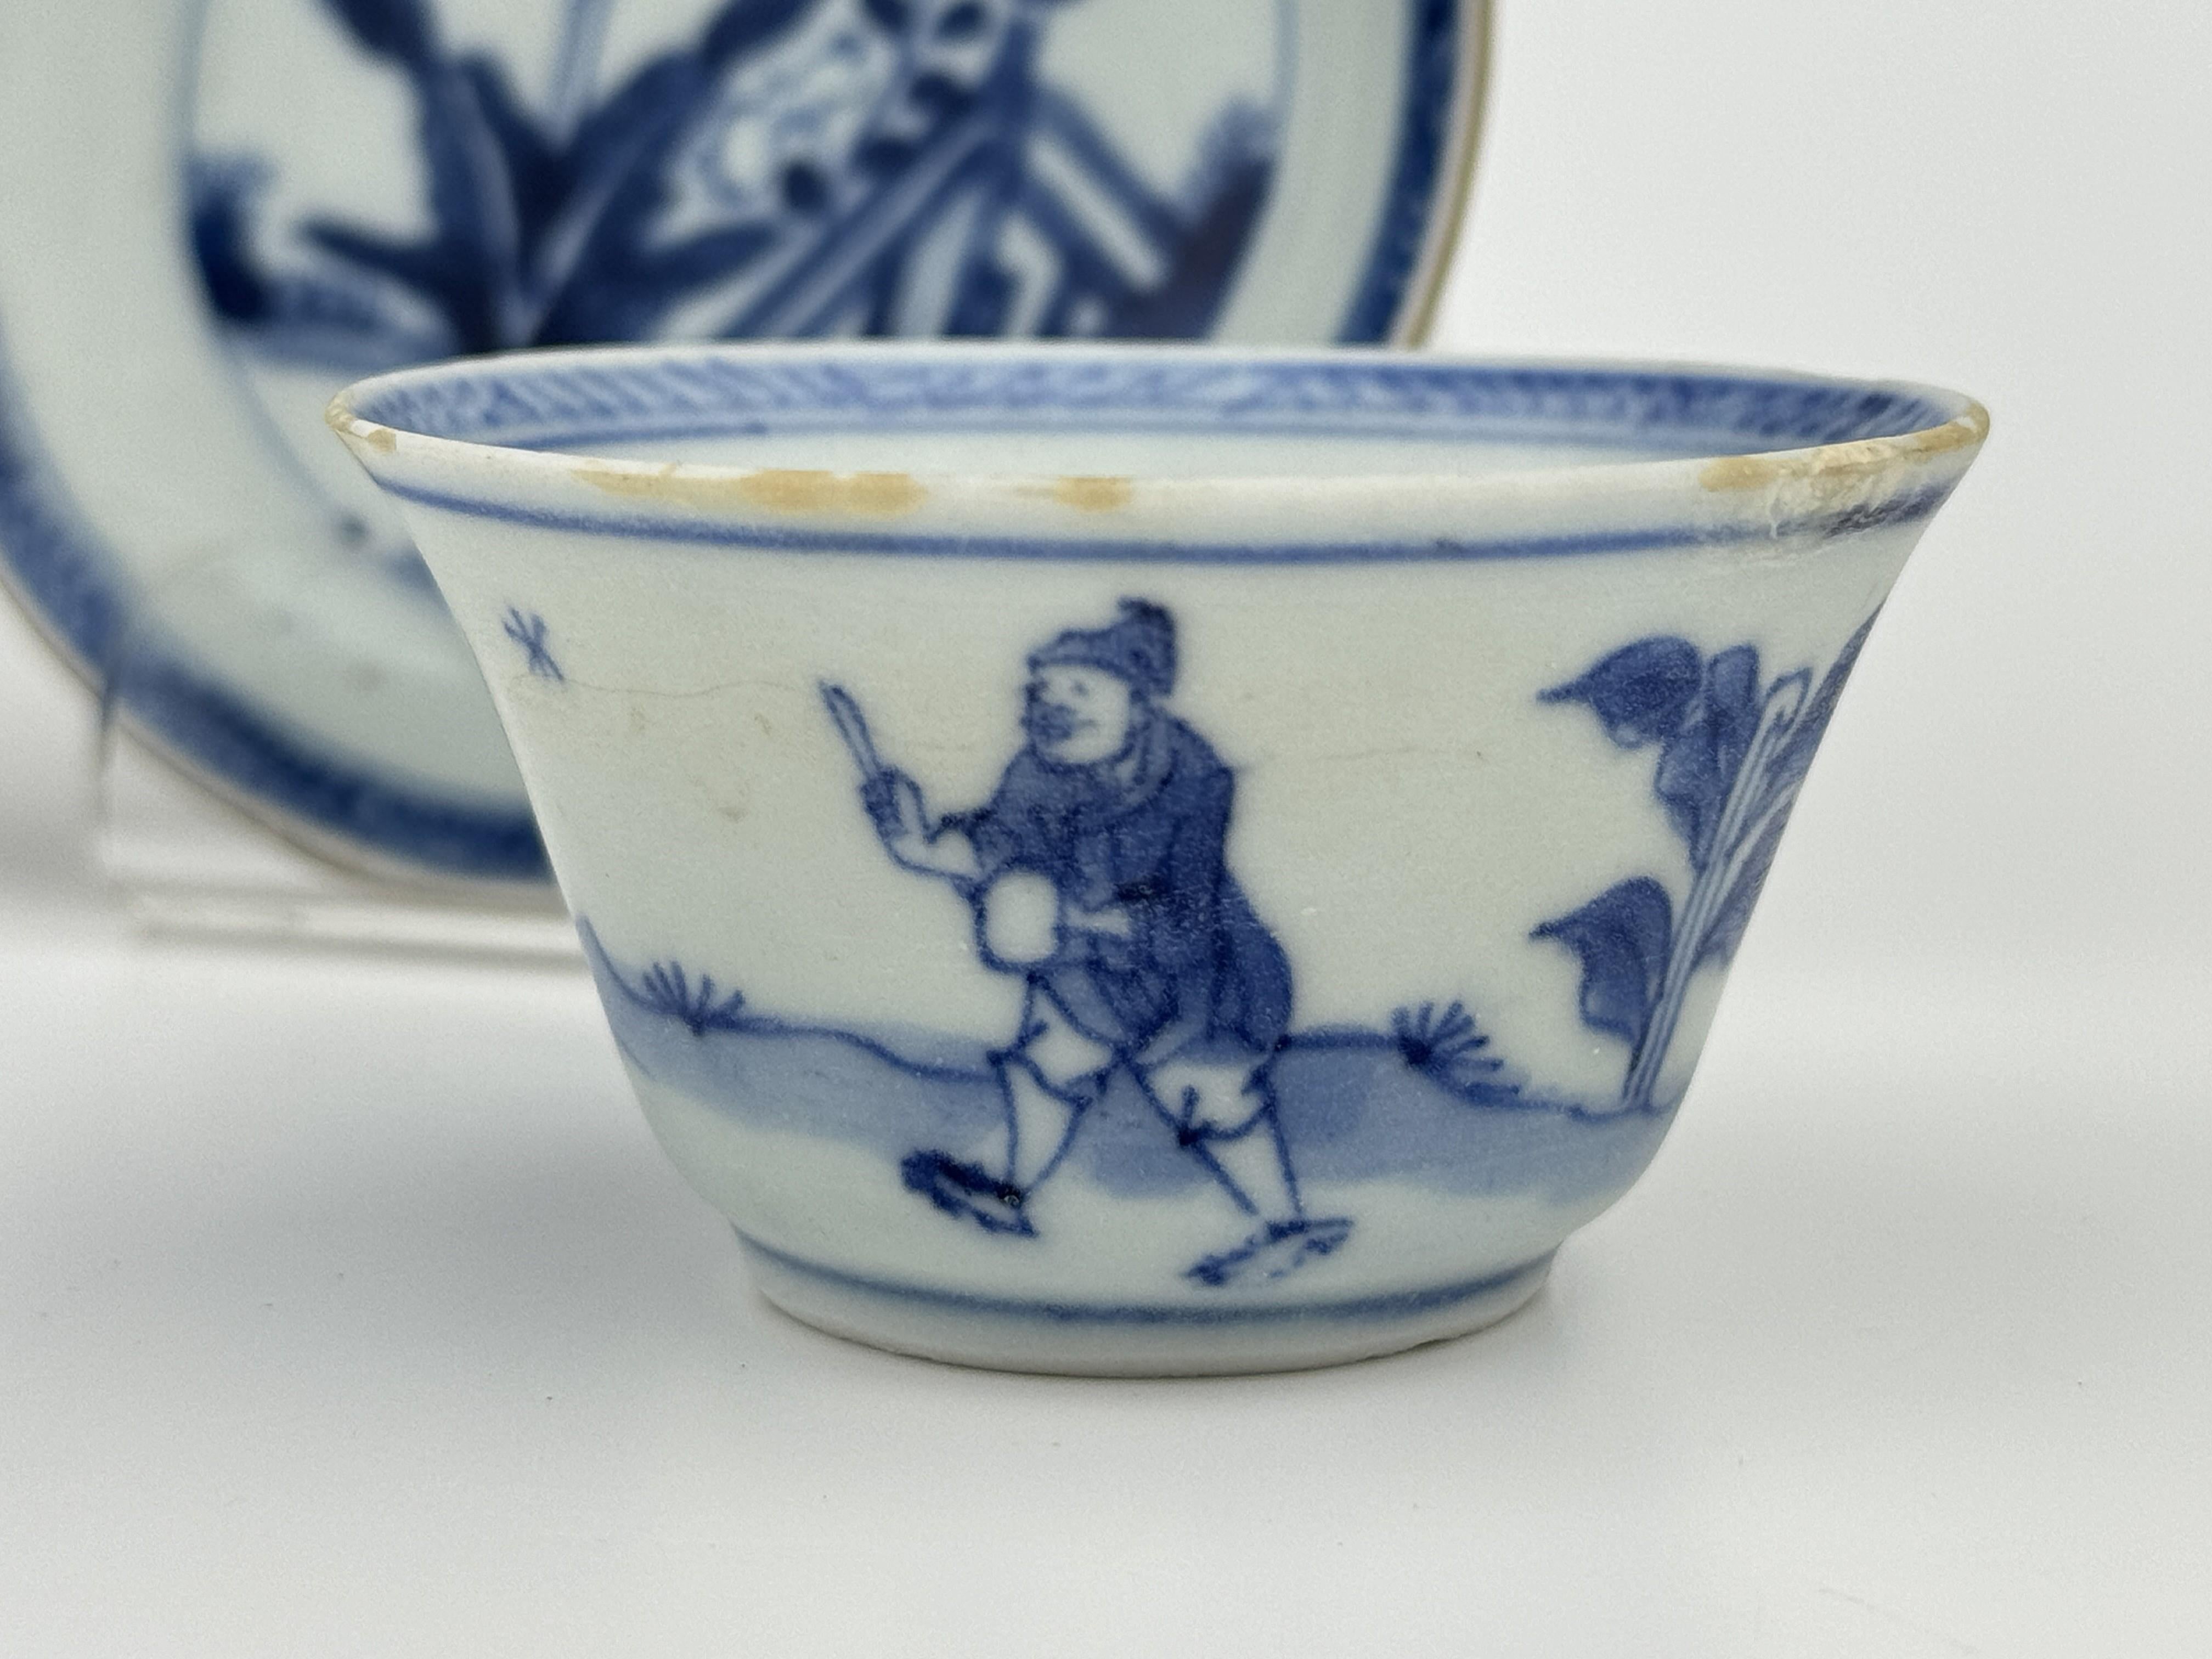 Blue and White Tea Set c 1725, Qing Dynasty, Yongzheng Reign For Sale 4